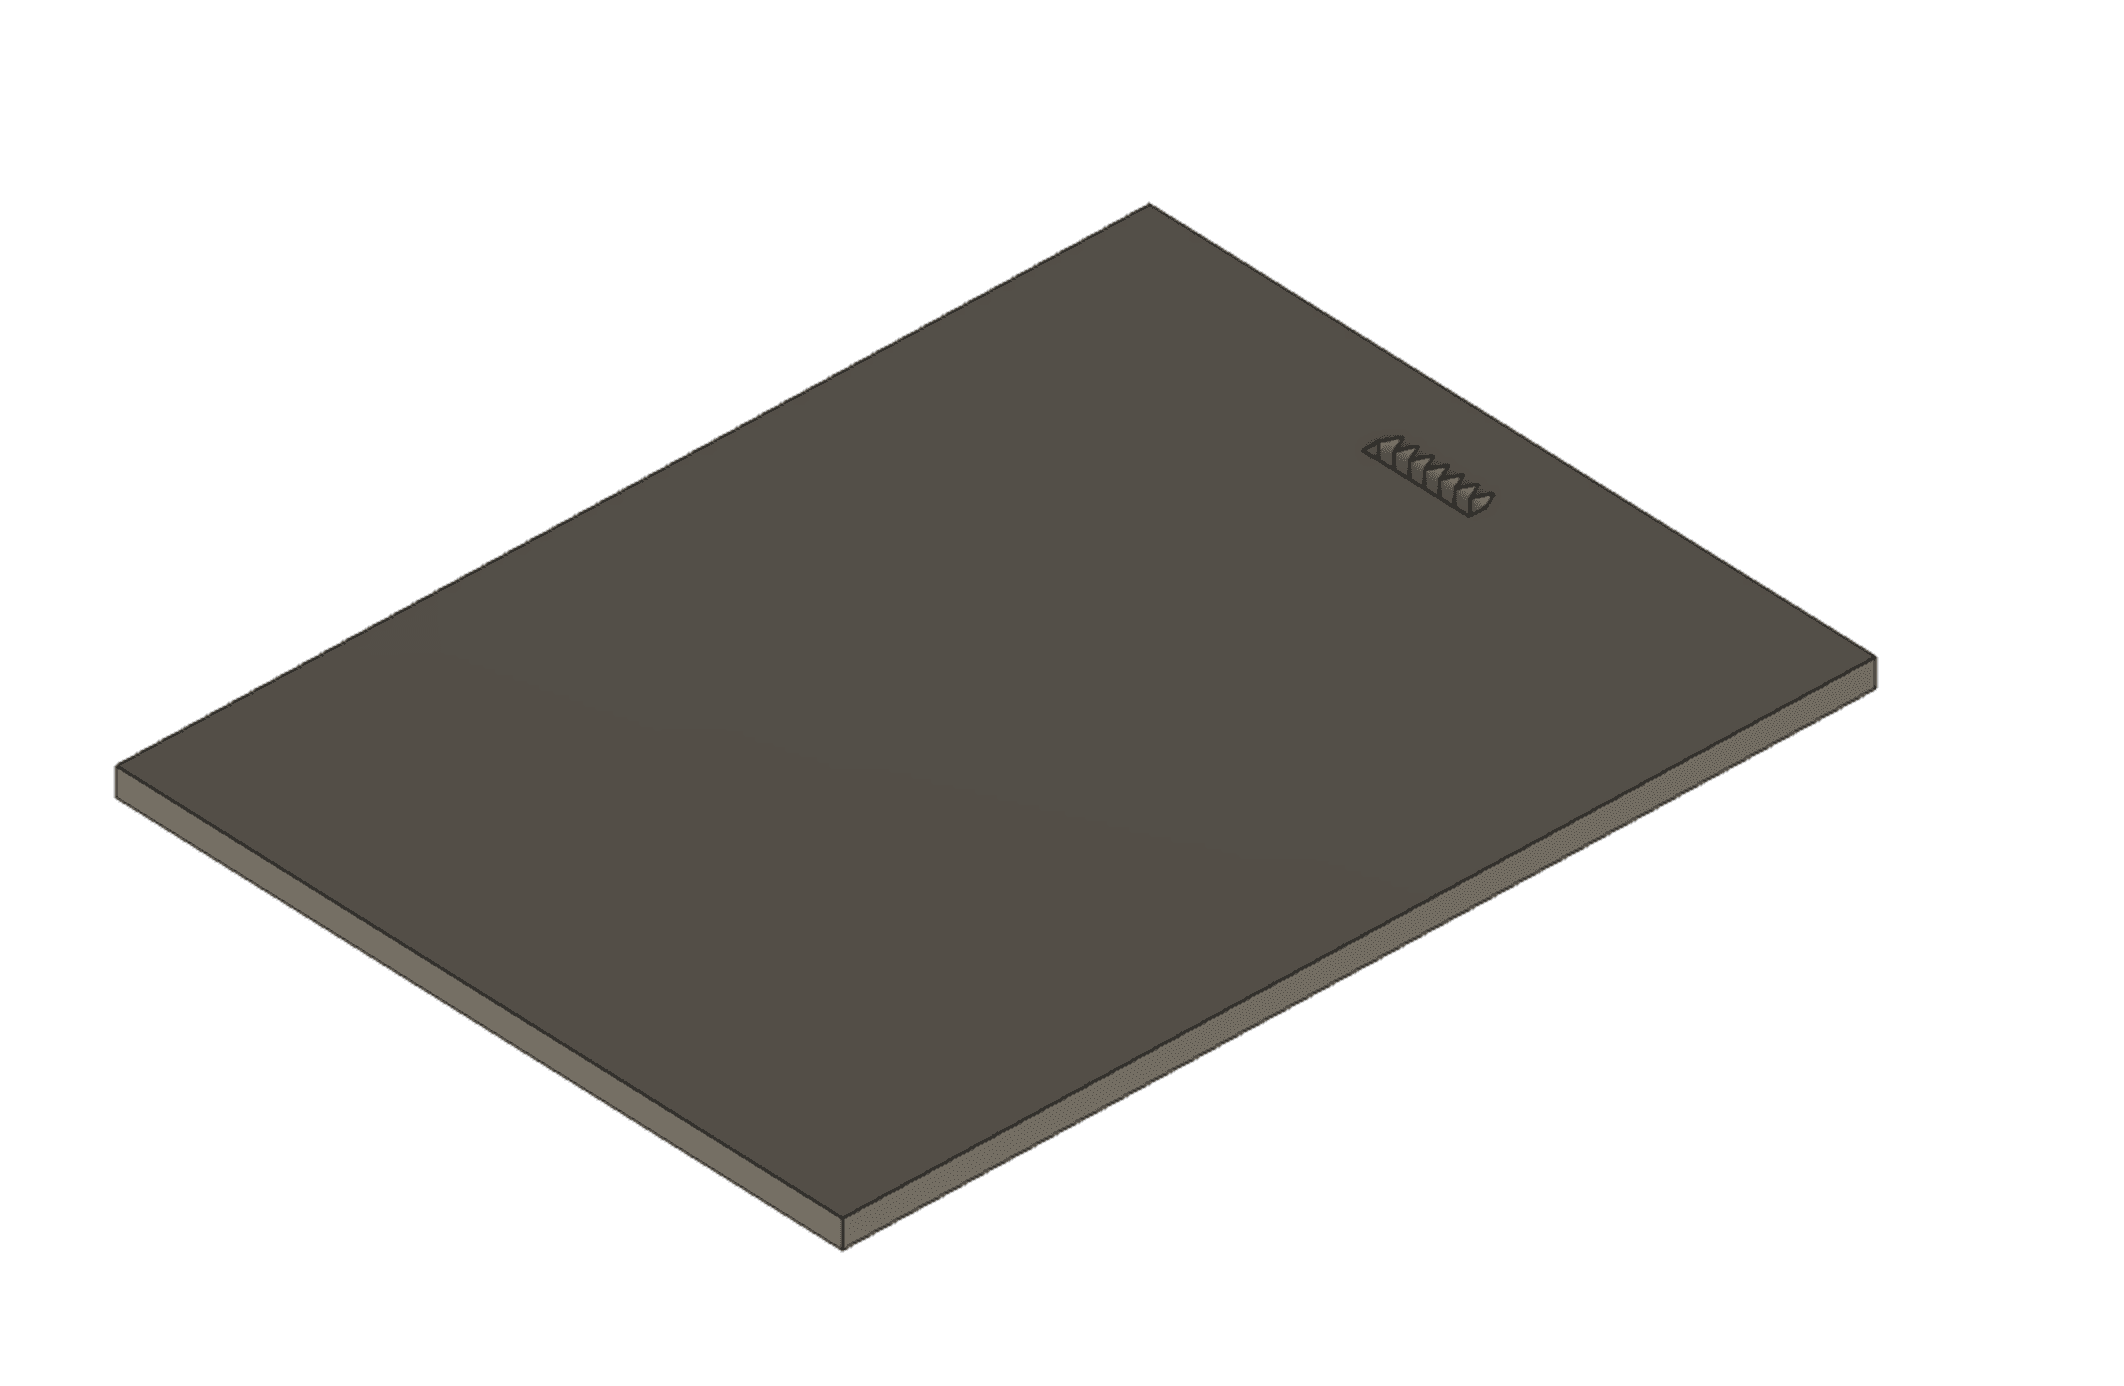 4x6 Picture Frame Template.stl 3d model